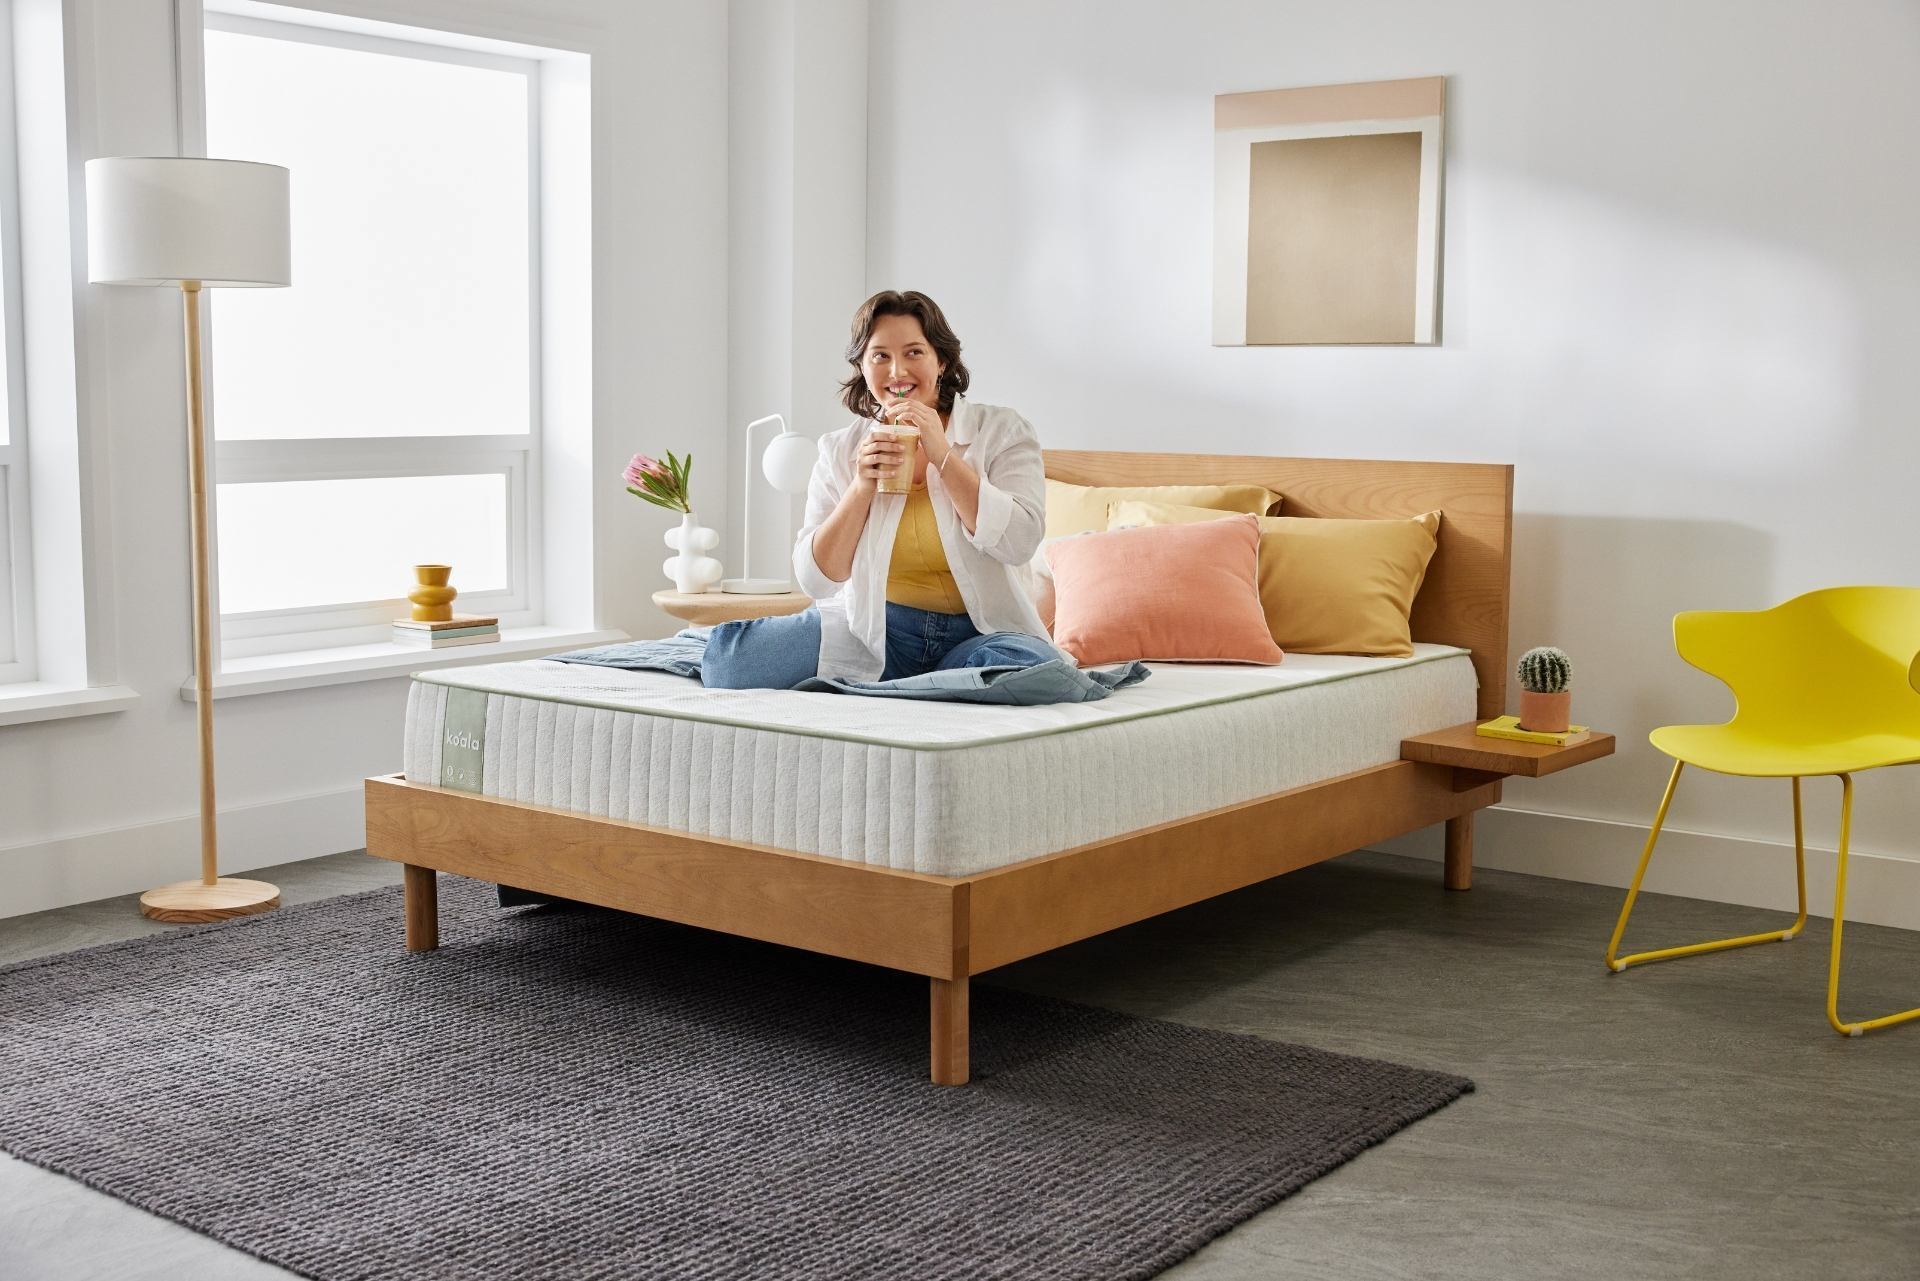 A young woman sits smiling after successfully setting up her new bedroom with Koala furniture and mattress